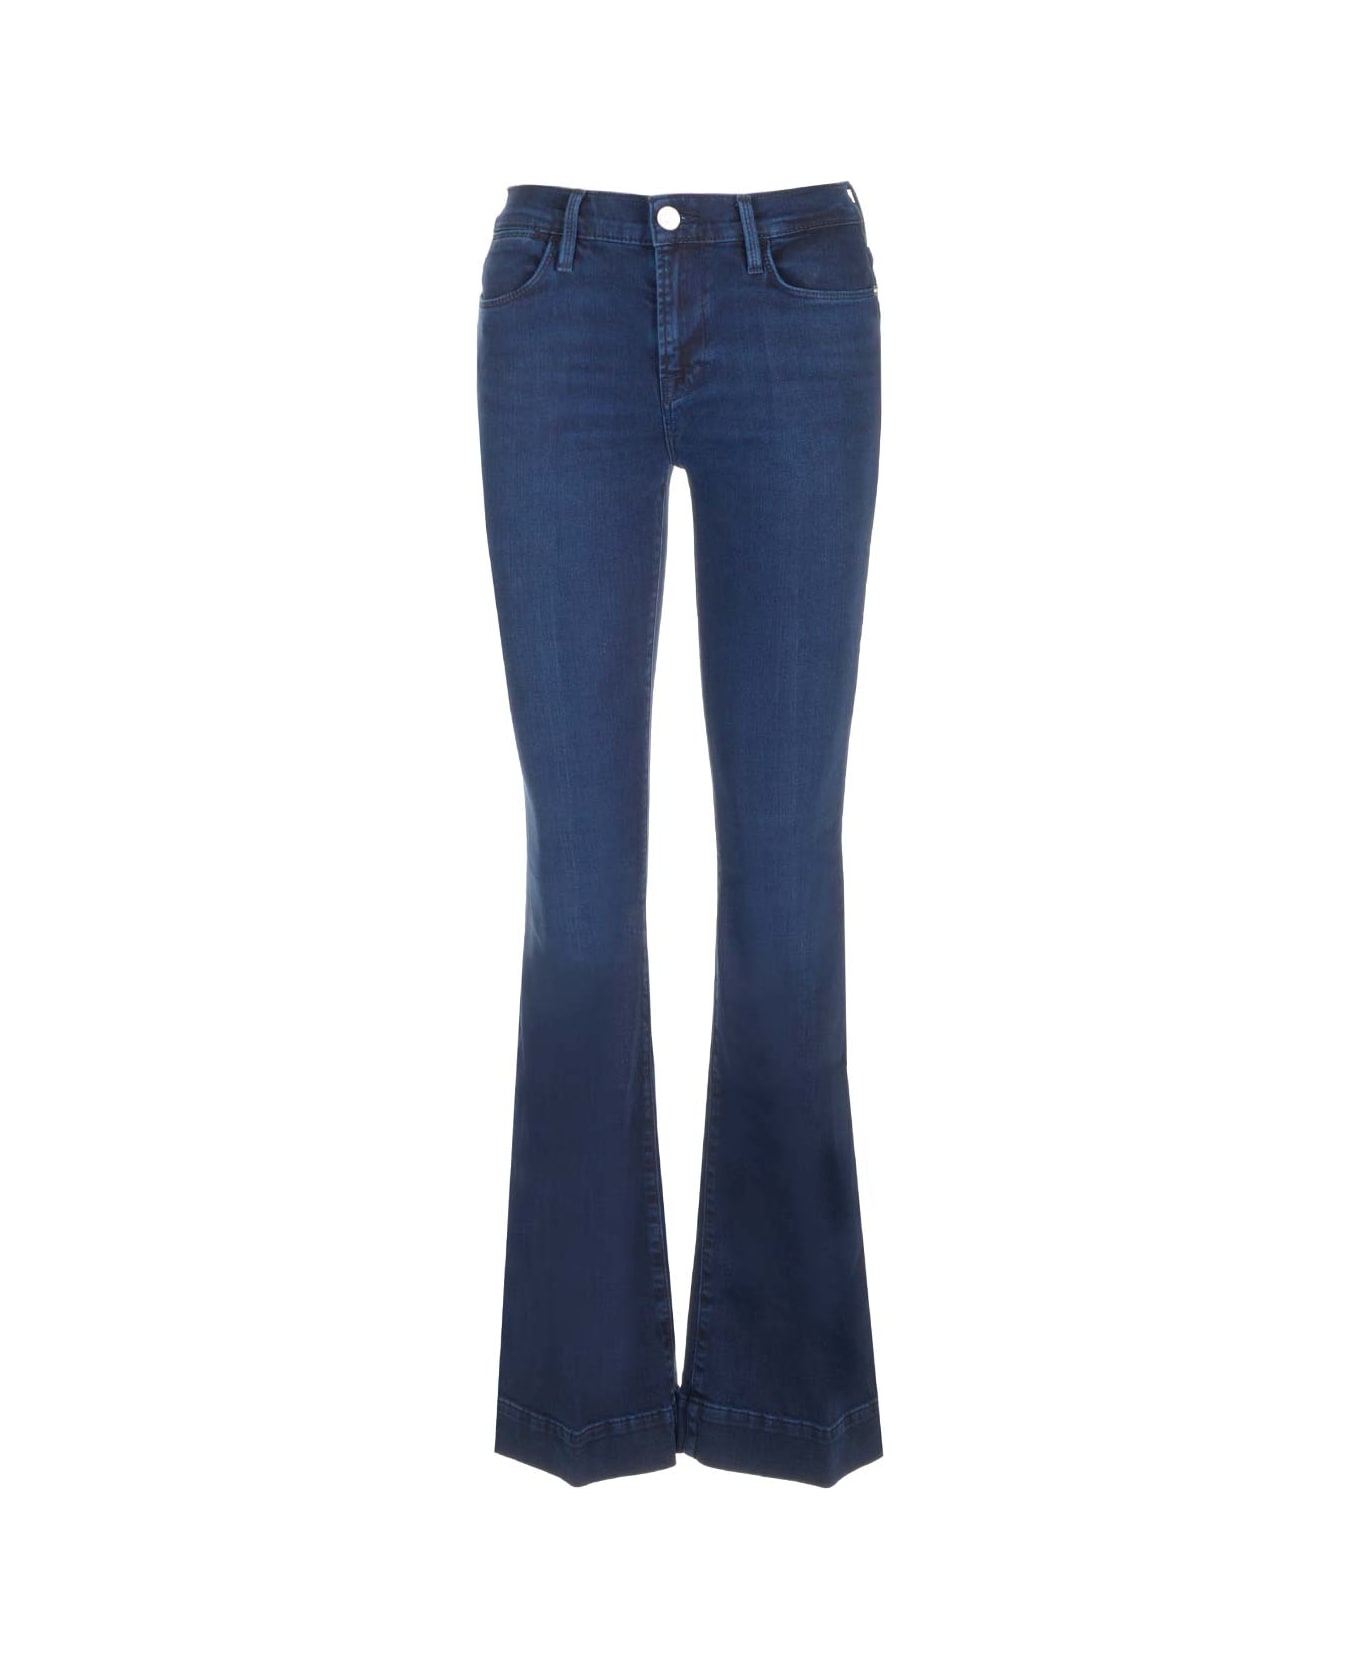 Frame 'le High' Stretch Boot Cut Jeans - Fion Fiona